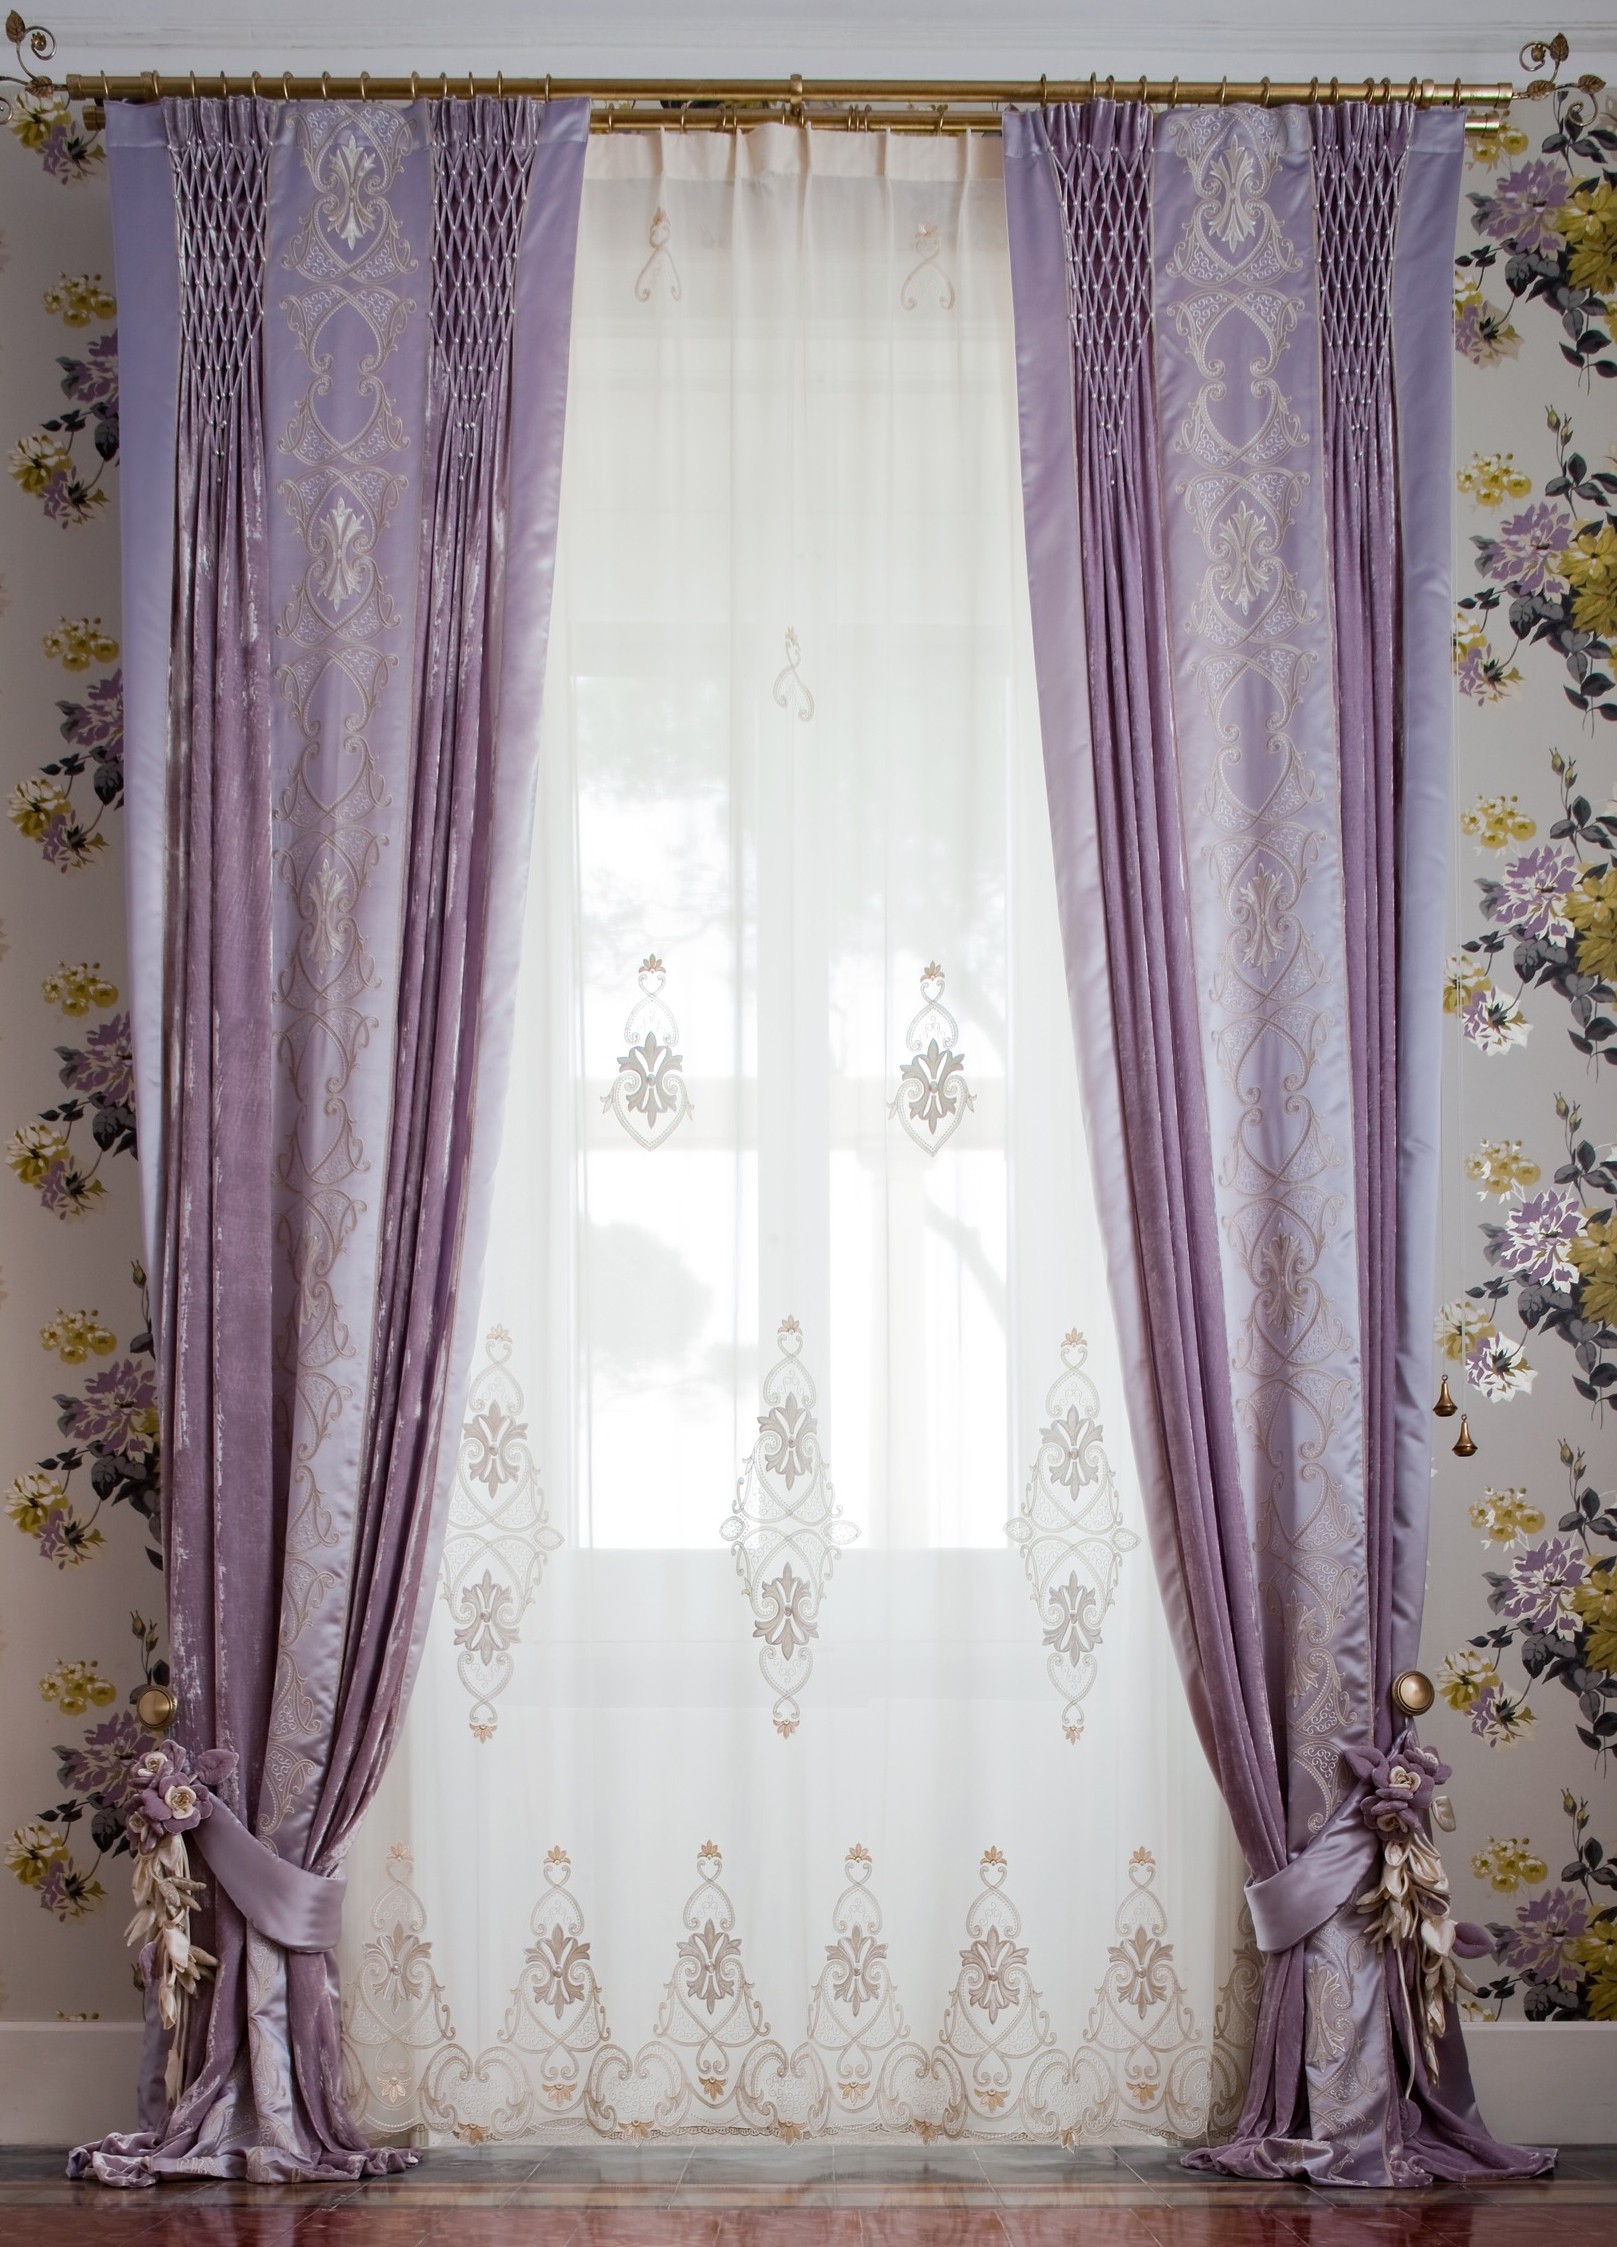 Custom Window Treatments Hand made draperies from our Masterpiece Collection. 74